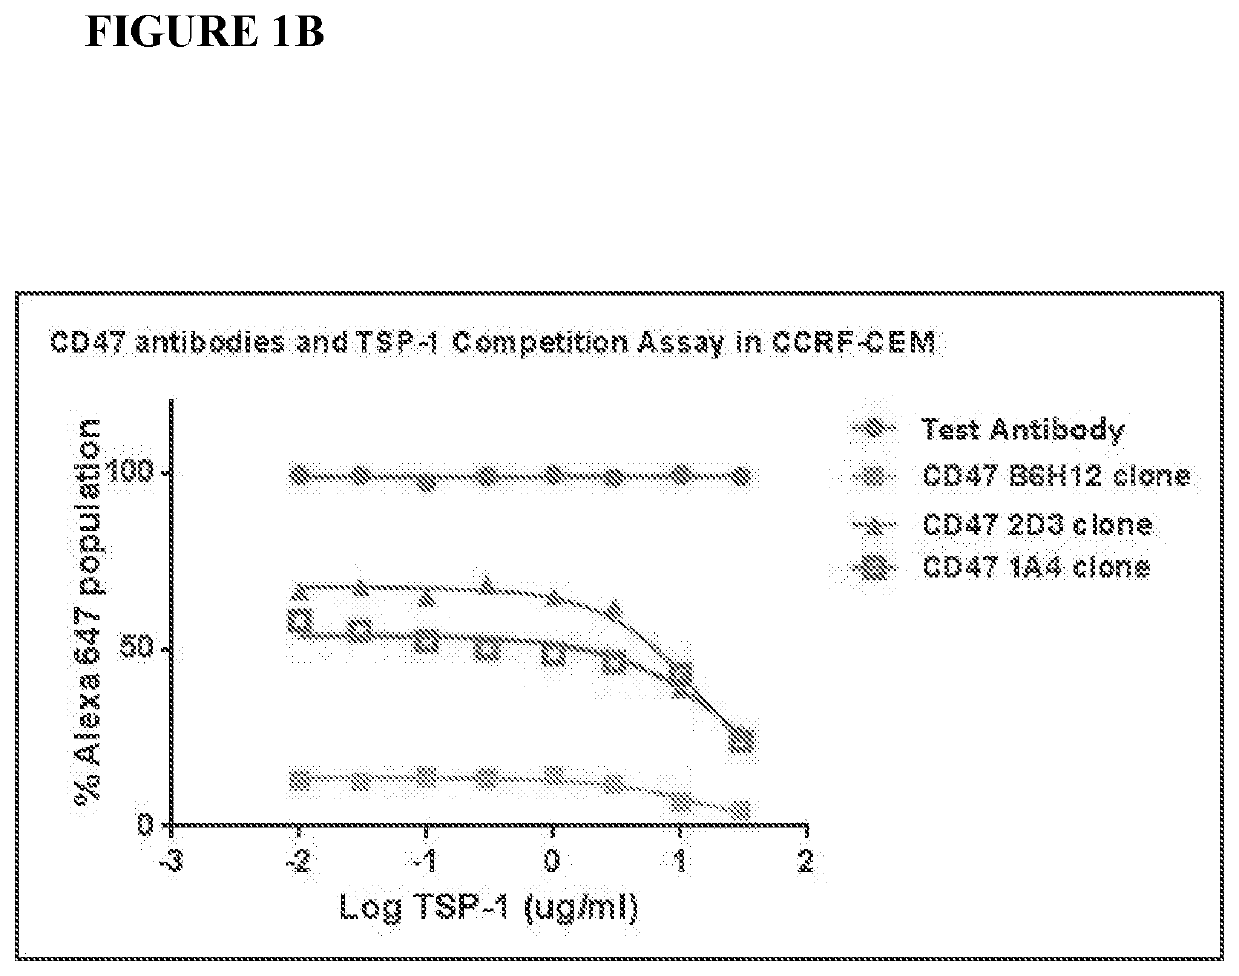 Cd47 antibodies and methods of use thereof